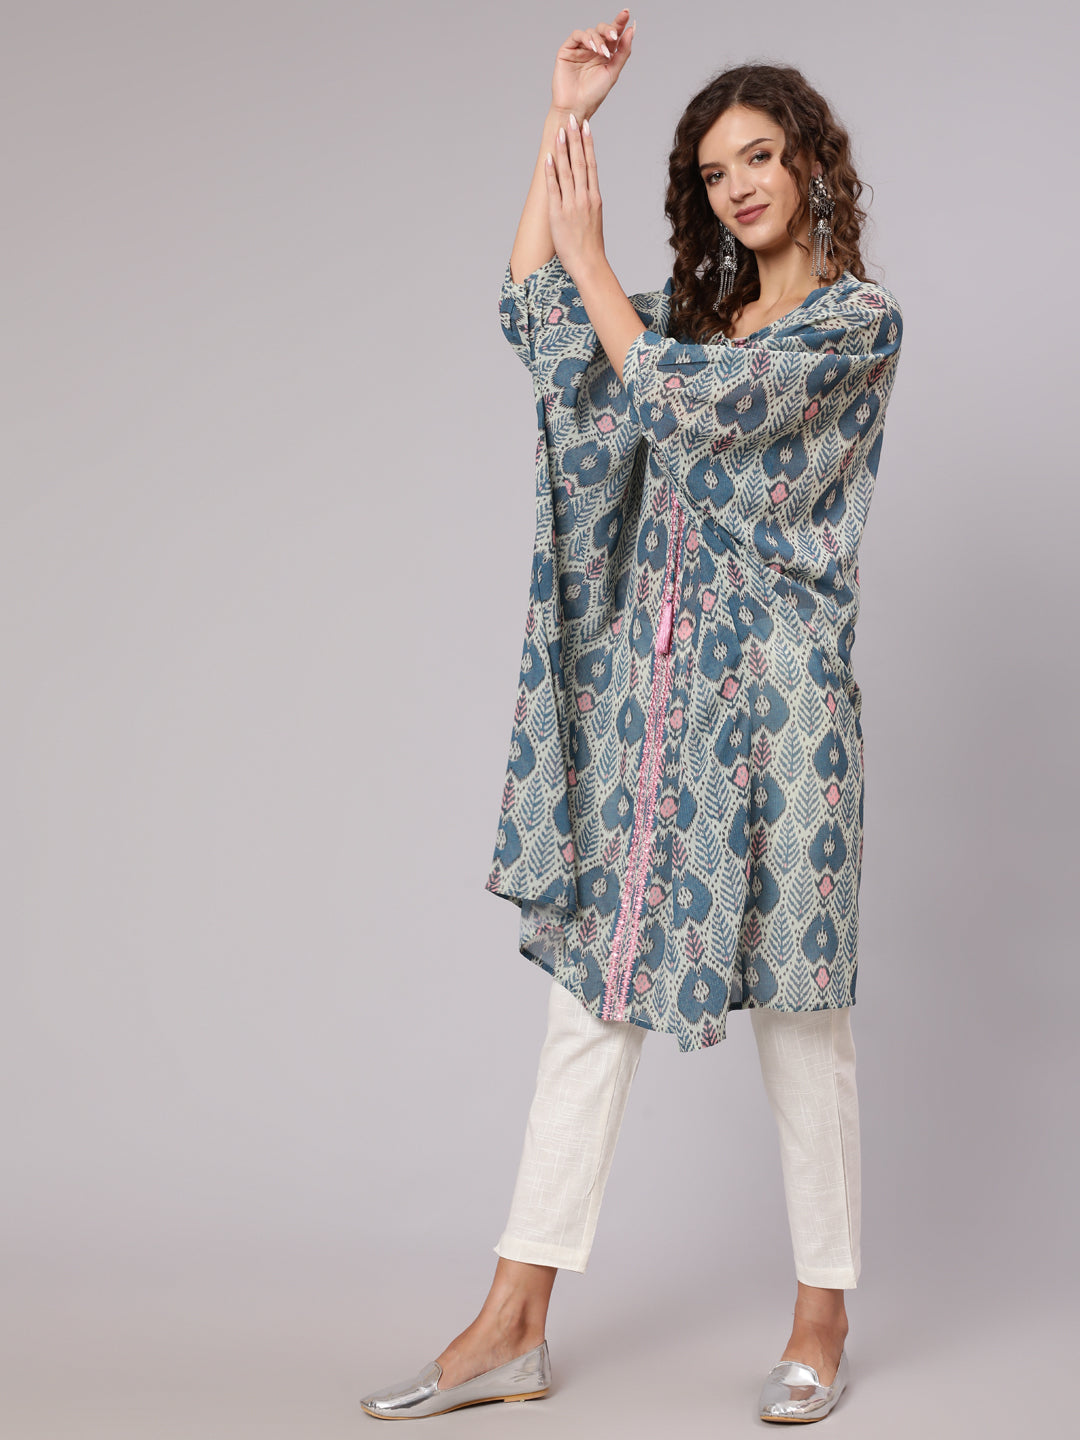 Multi Color Mirror Work Embroidered Georgette Kaftan With Tassels And Slip, Cotton White Regular Fit Trousers